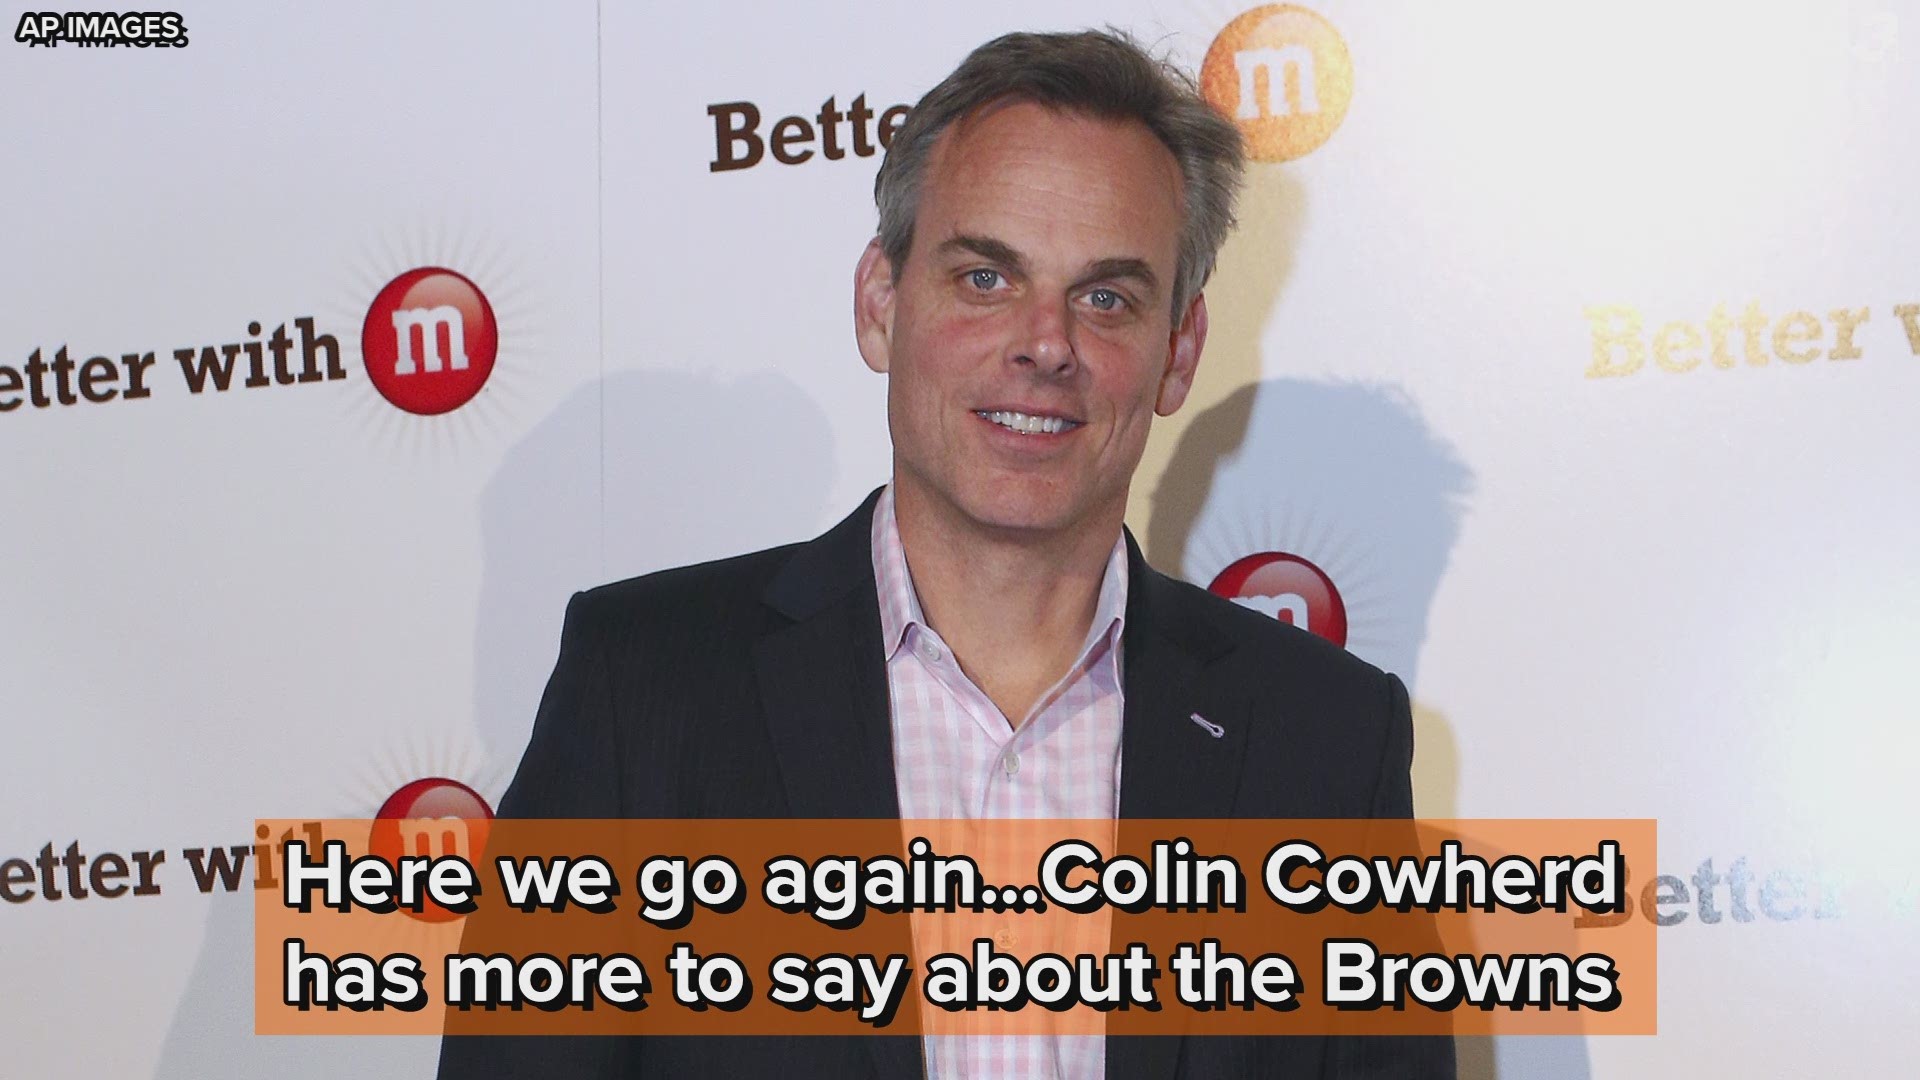 On Monday, Fox Sports Radio's Colin Cowherd shared his forecast for the Cleveland Browns' 2019 season.